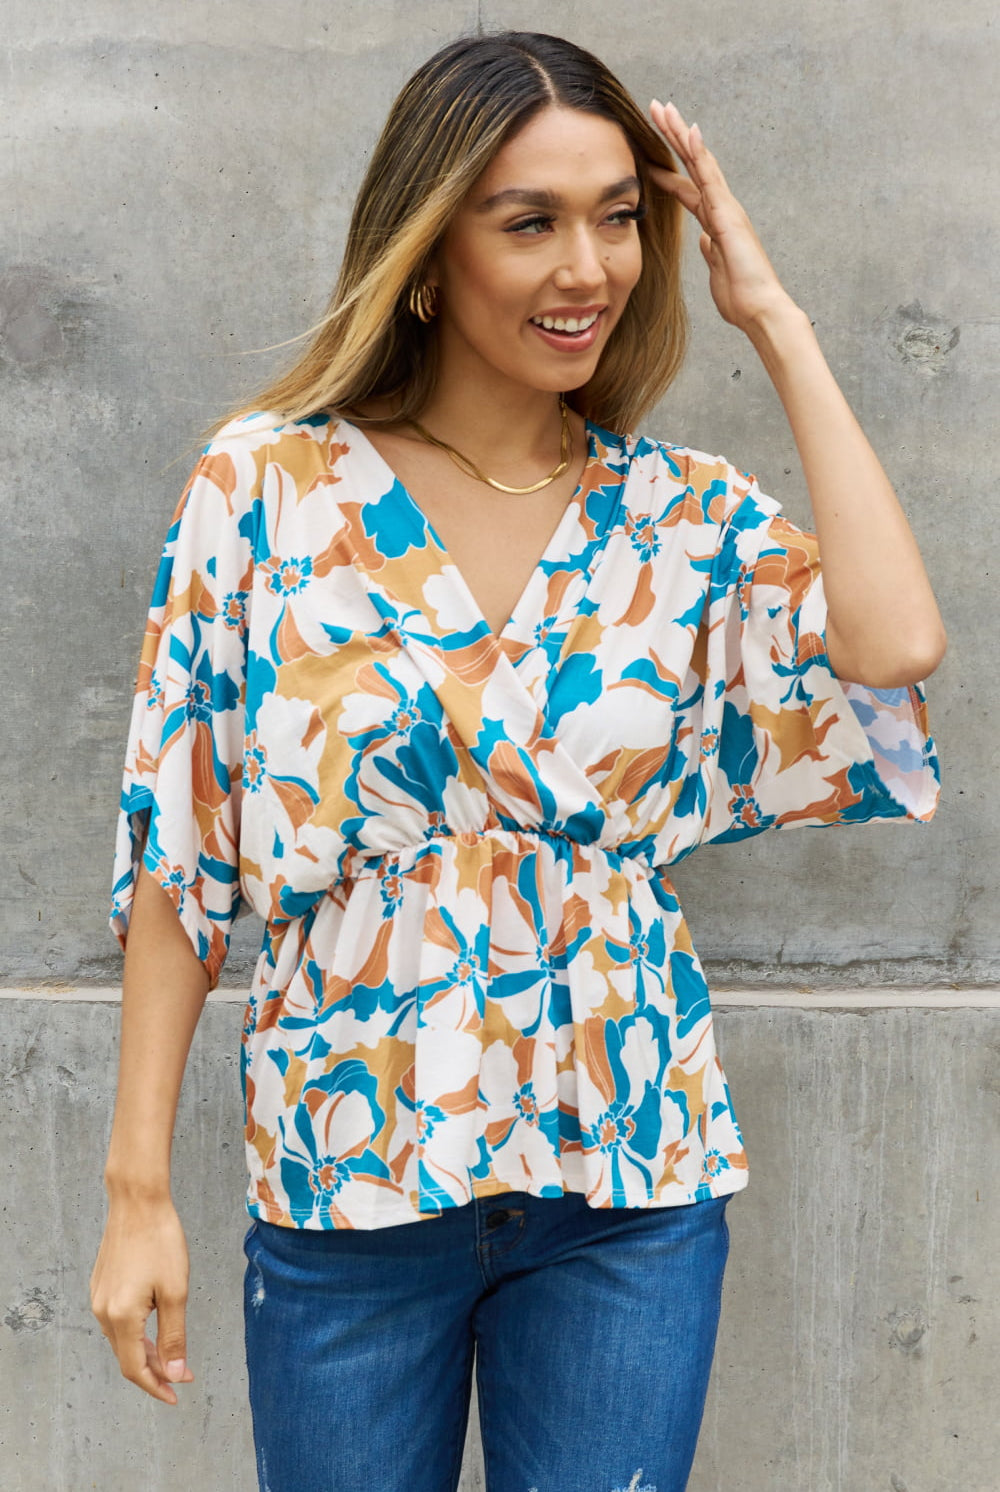 BOMBOM Floral Print Wrap Tunic Top - GemThreads Boutique BOMBOM Floral Print Wrap Tunic Top